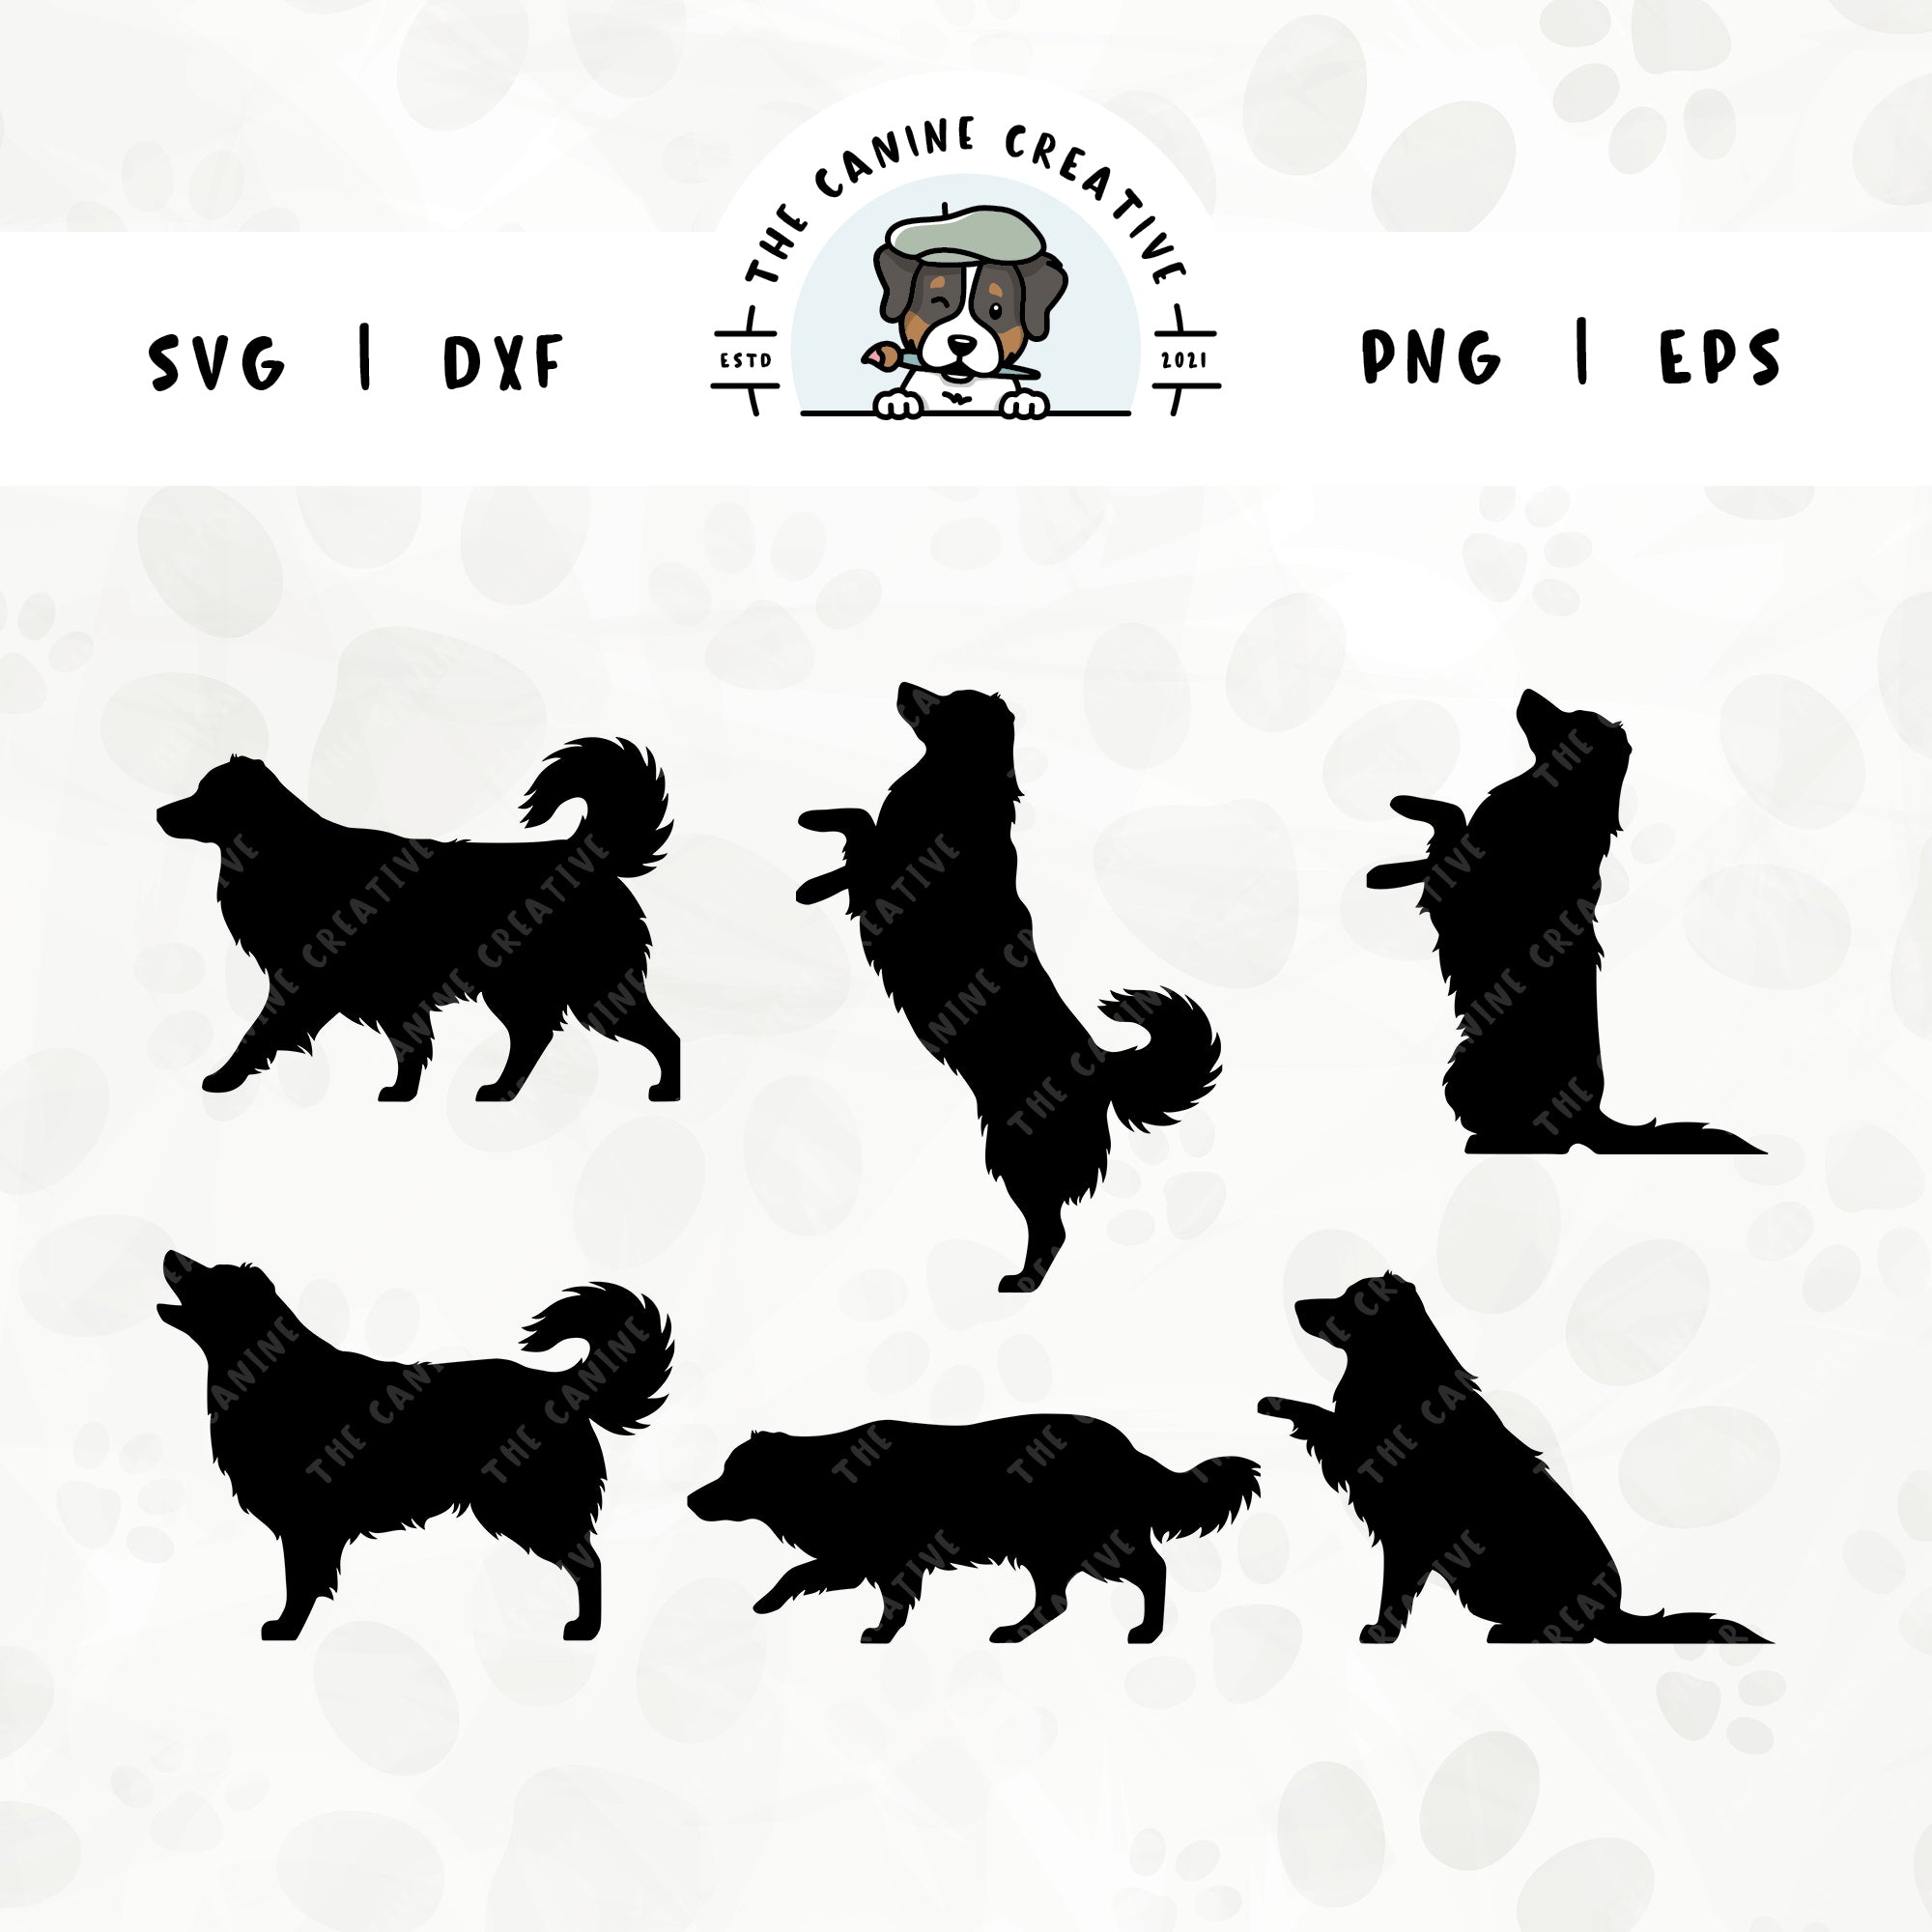 This 6-pack, long tail Australian Shepherd silhouette bundle (set 2) features various dog poses including walking, herding, jumping up, begging, barking, and shaking a paw. File formats include: SVG, DXF, PNG, and EPS.